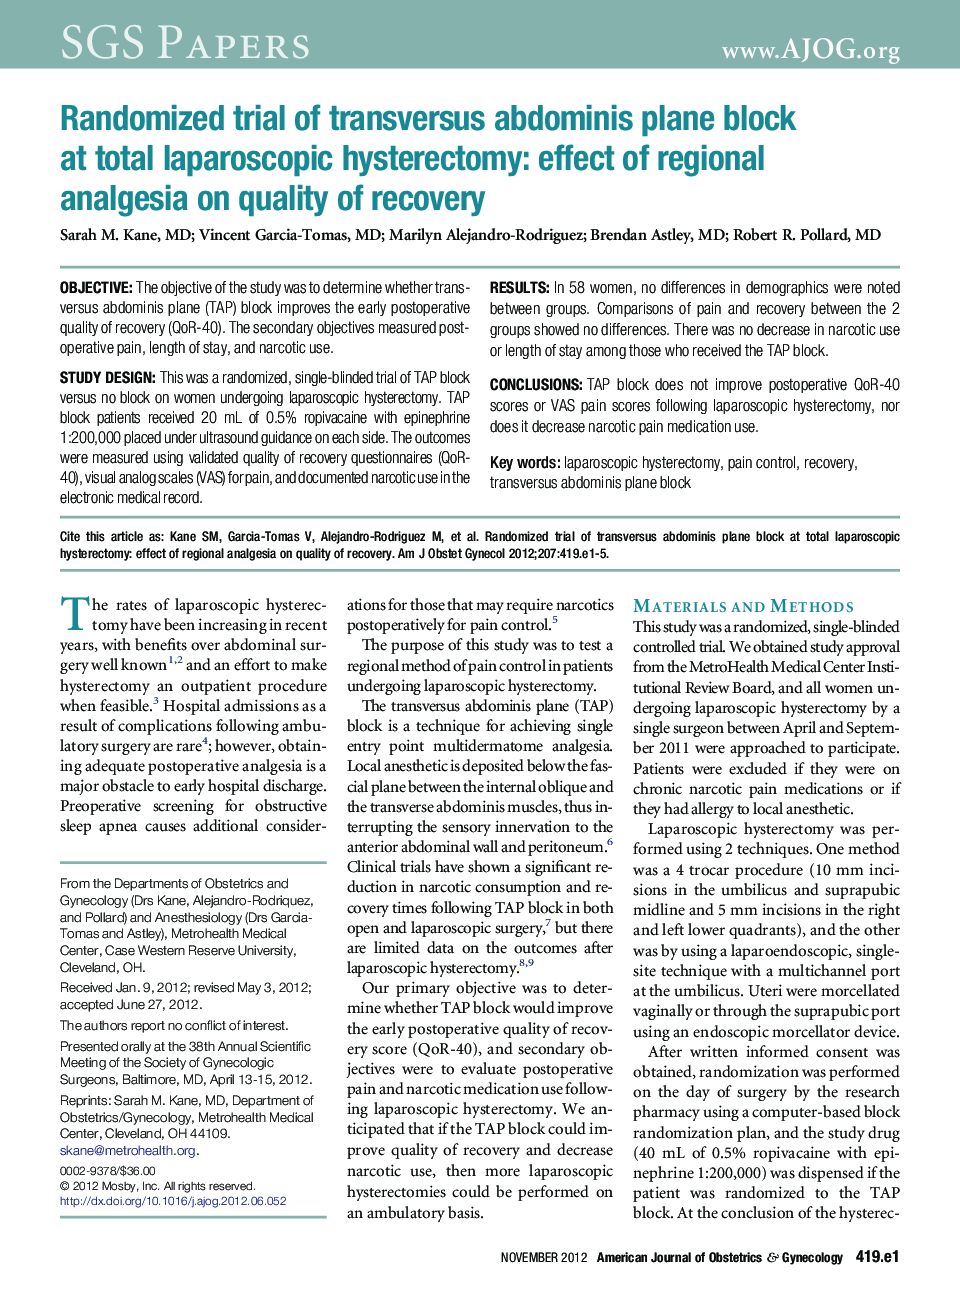 Randomized trial of transversus abdominis plane block at total laparoscopic hysterectomy: effect of regional analgesia on quality of recovery